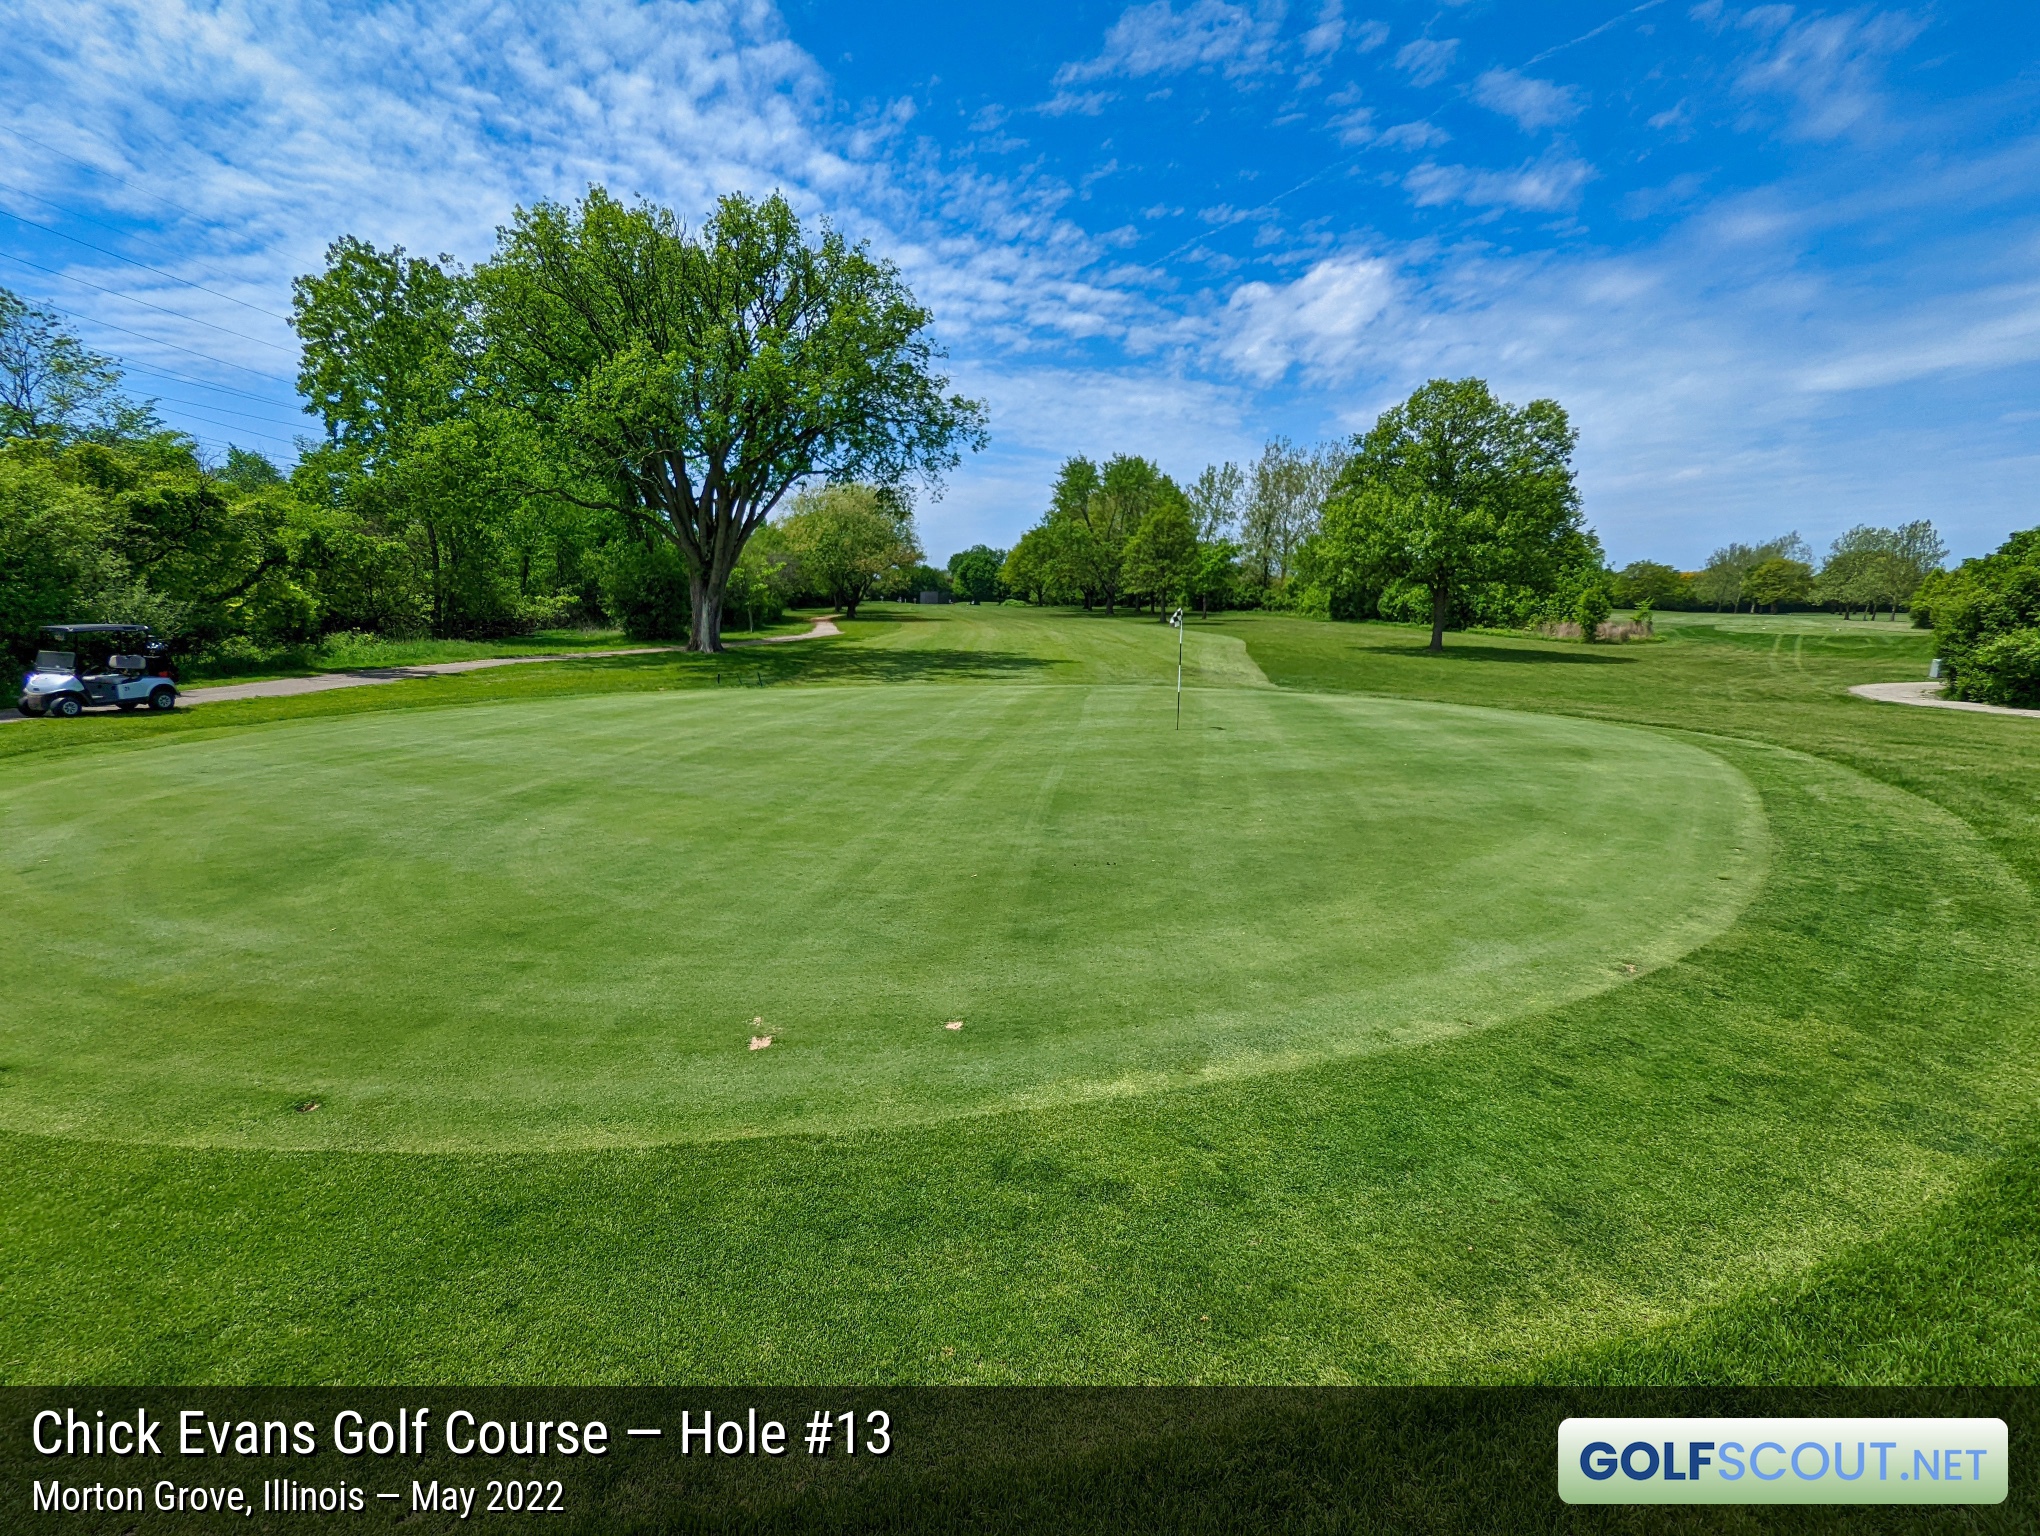 Photo of hole #13 at Chick Evans Golf Course in Morton Grove, Illinois. 